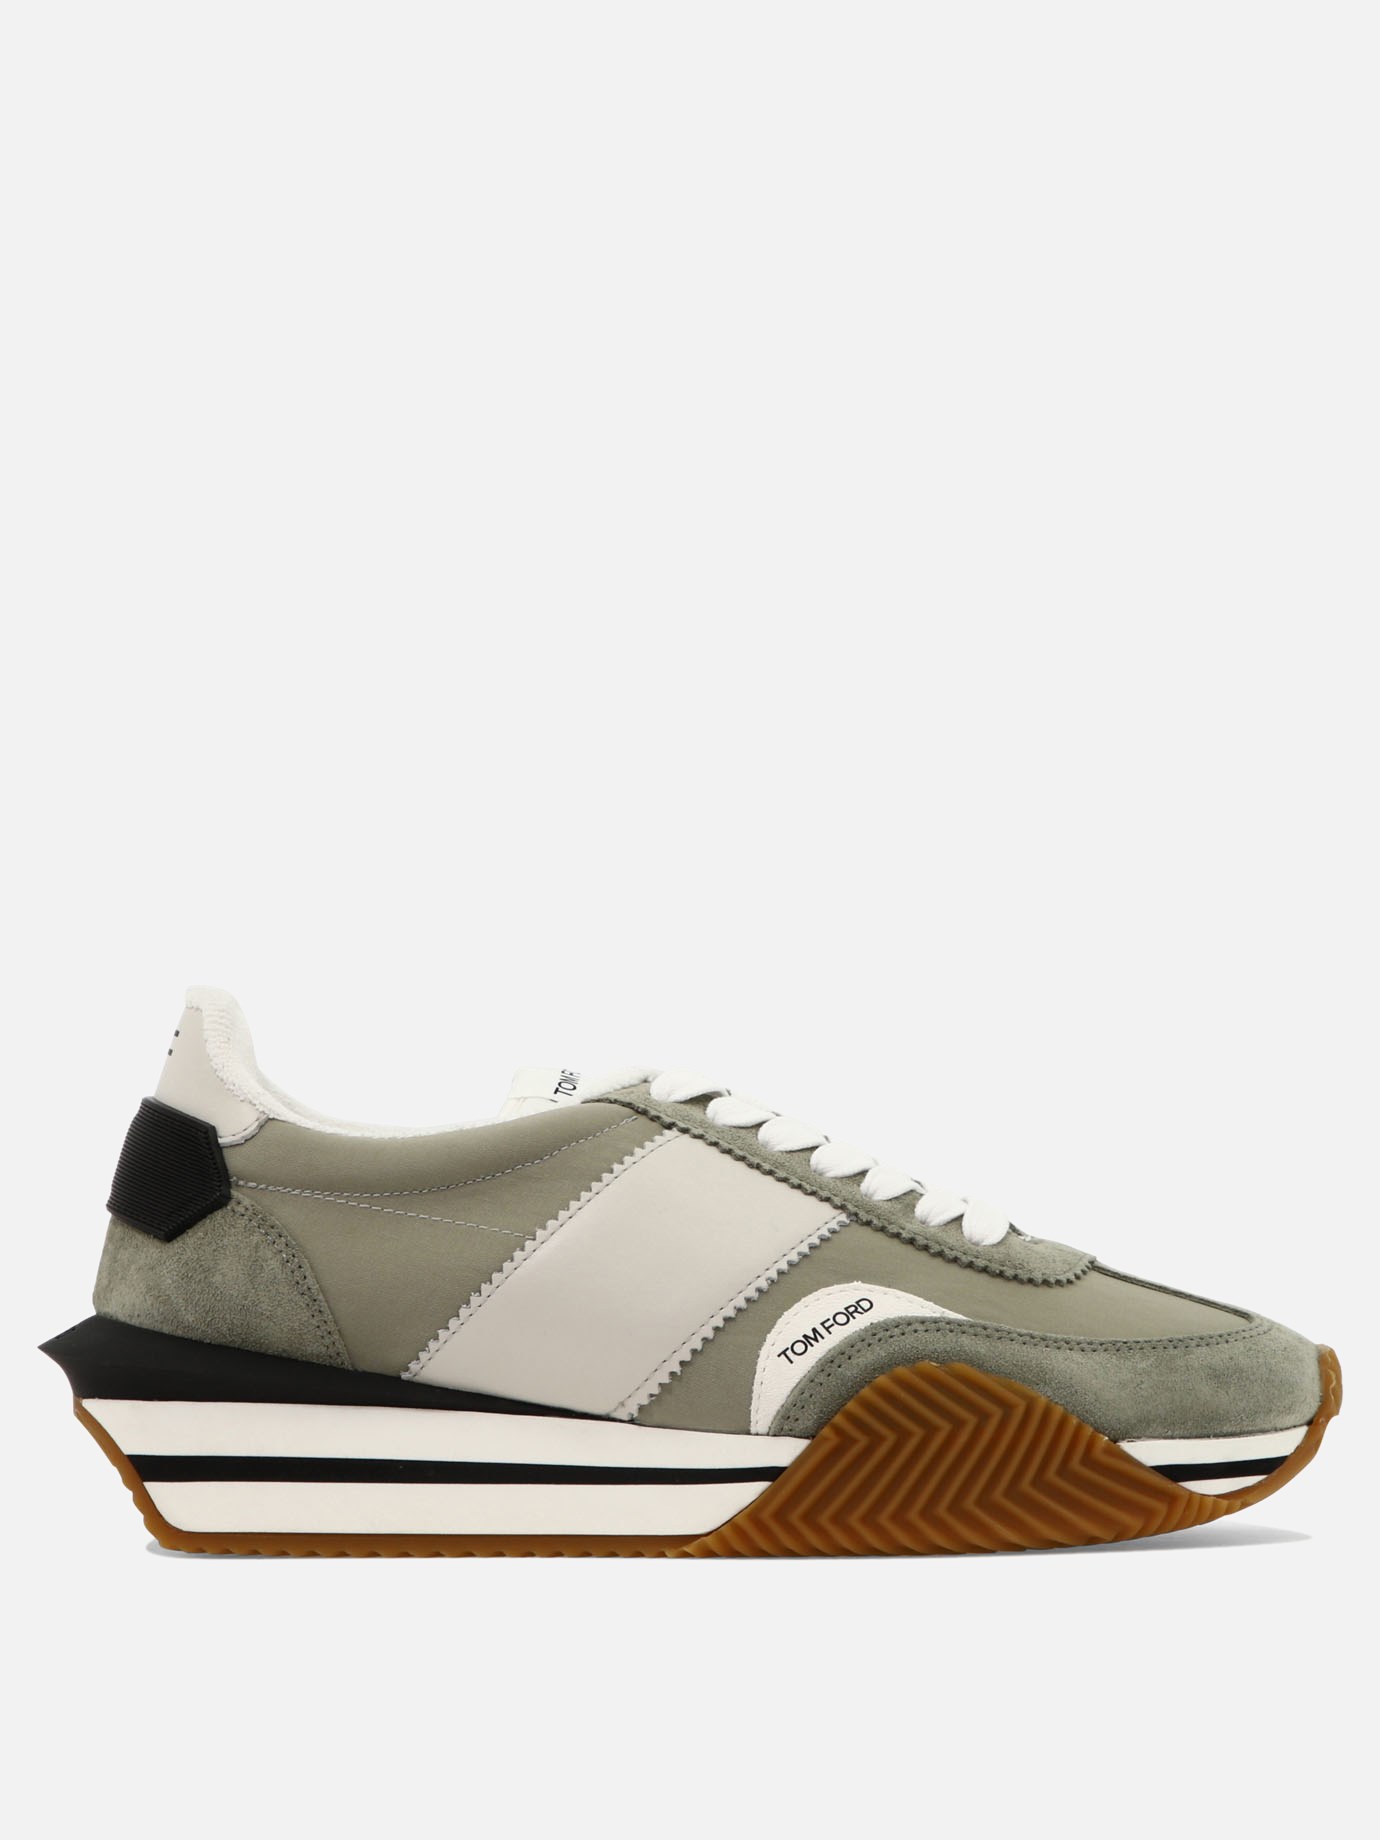  James  sneakers by Tom Ford